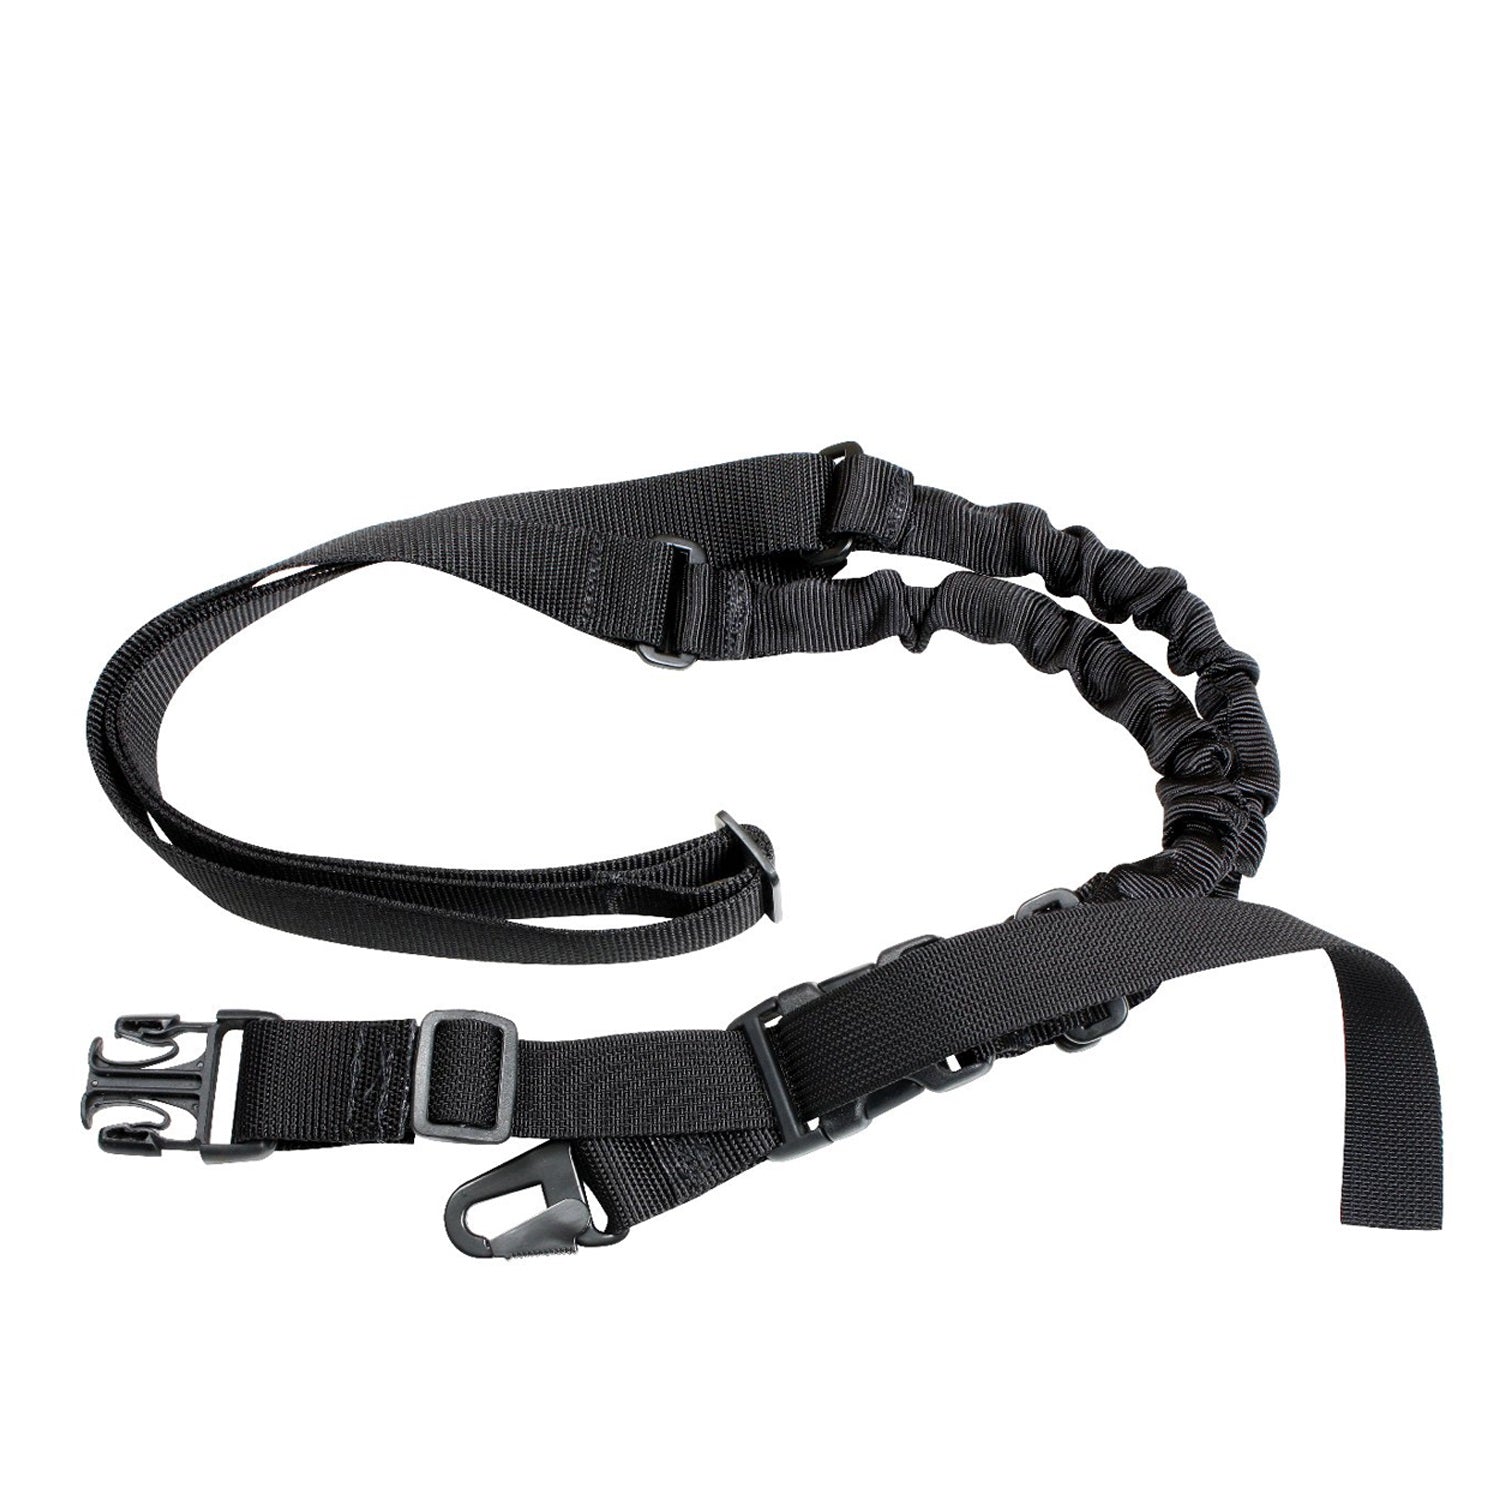 Rothco Tactical Single Point Sling Black